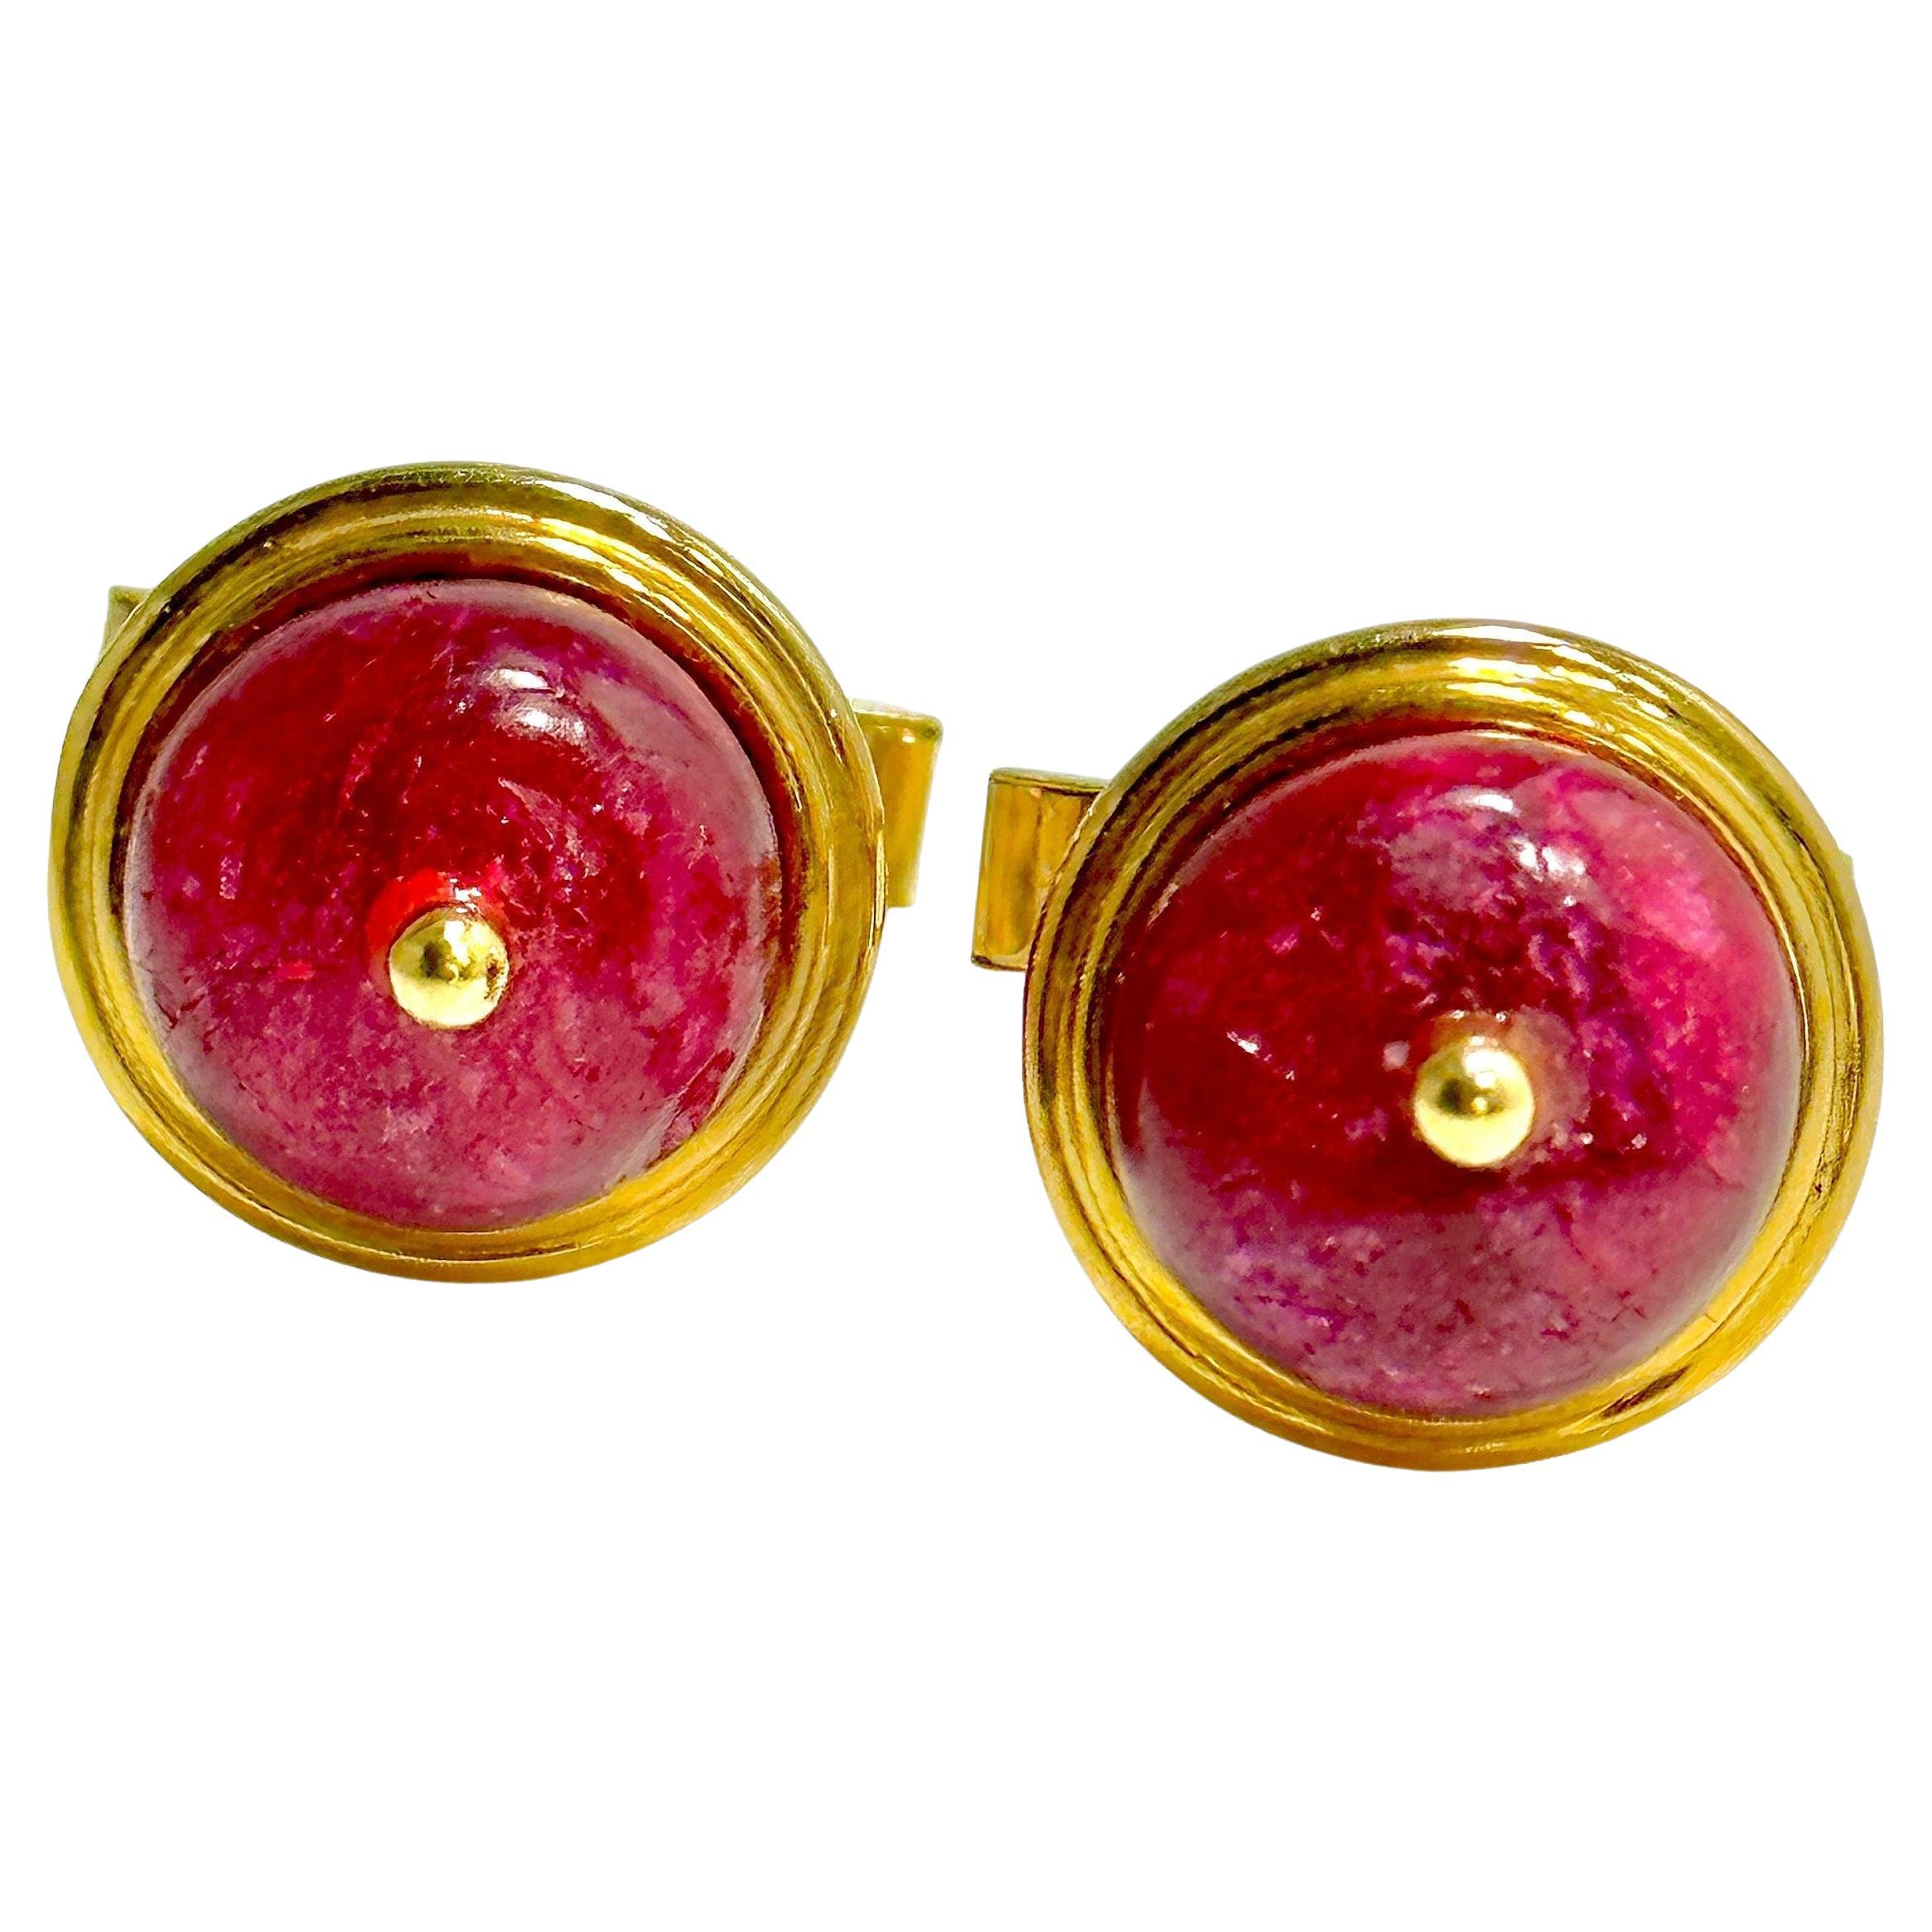 This artistic pair 18K yellow gold cuff links, created BY Emis Beros,  are each set with one 12.5mm natural ruby bead edged by a two level gold bezel. The effect is striking and entirely unique. Each cuff link measures 5/8 inches in diameter.